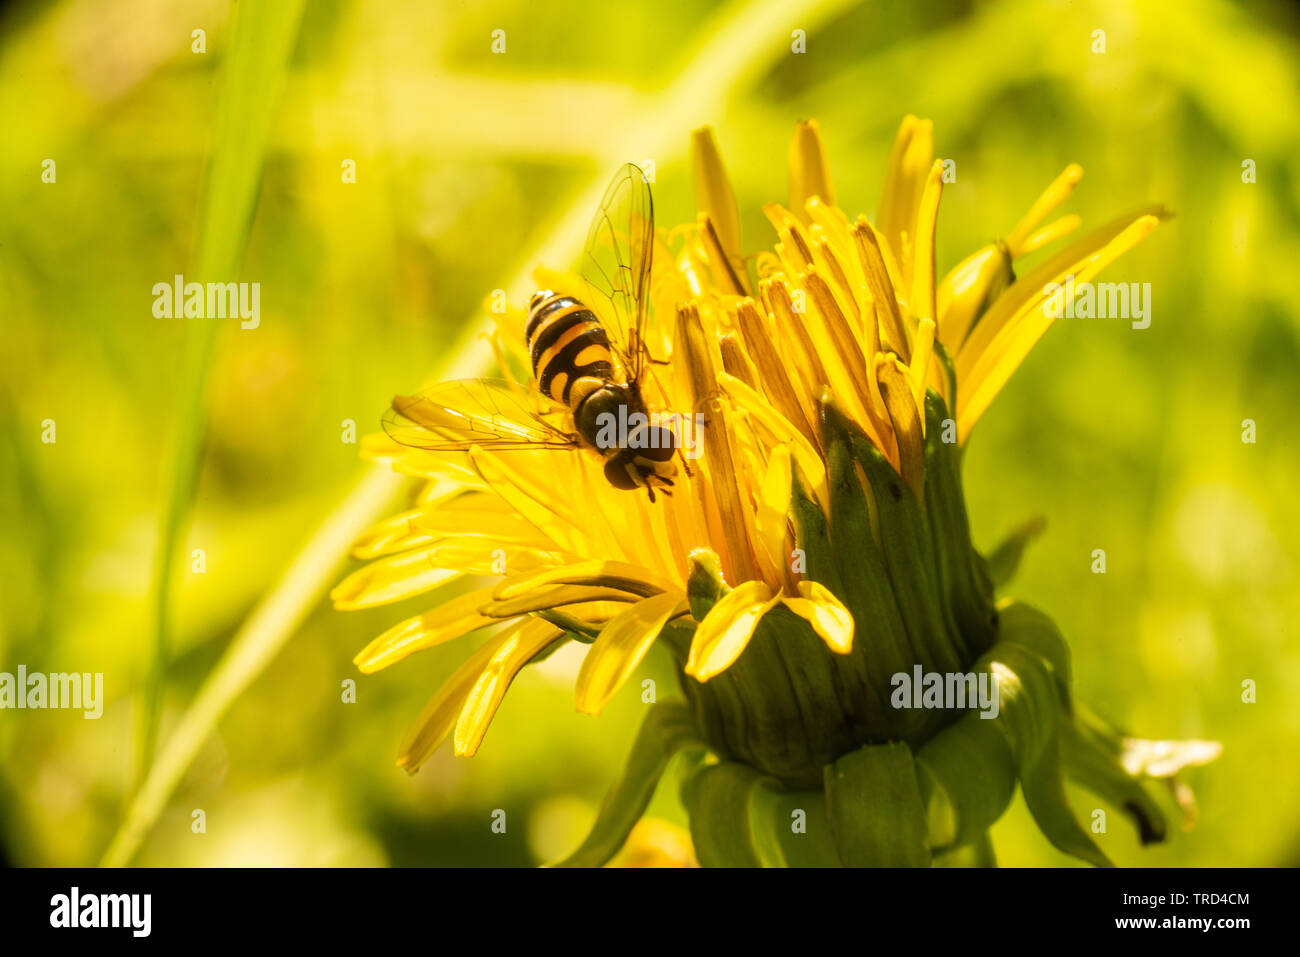 Hoverfly on a dandelion in a field of grass. Stock Photo